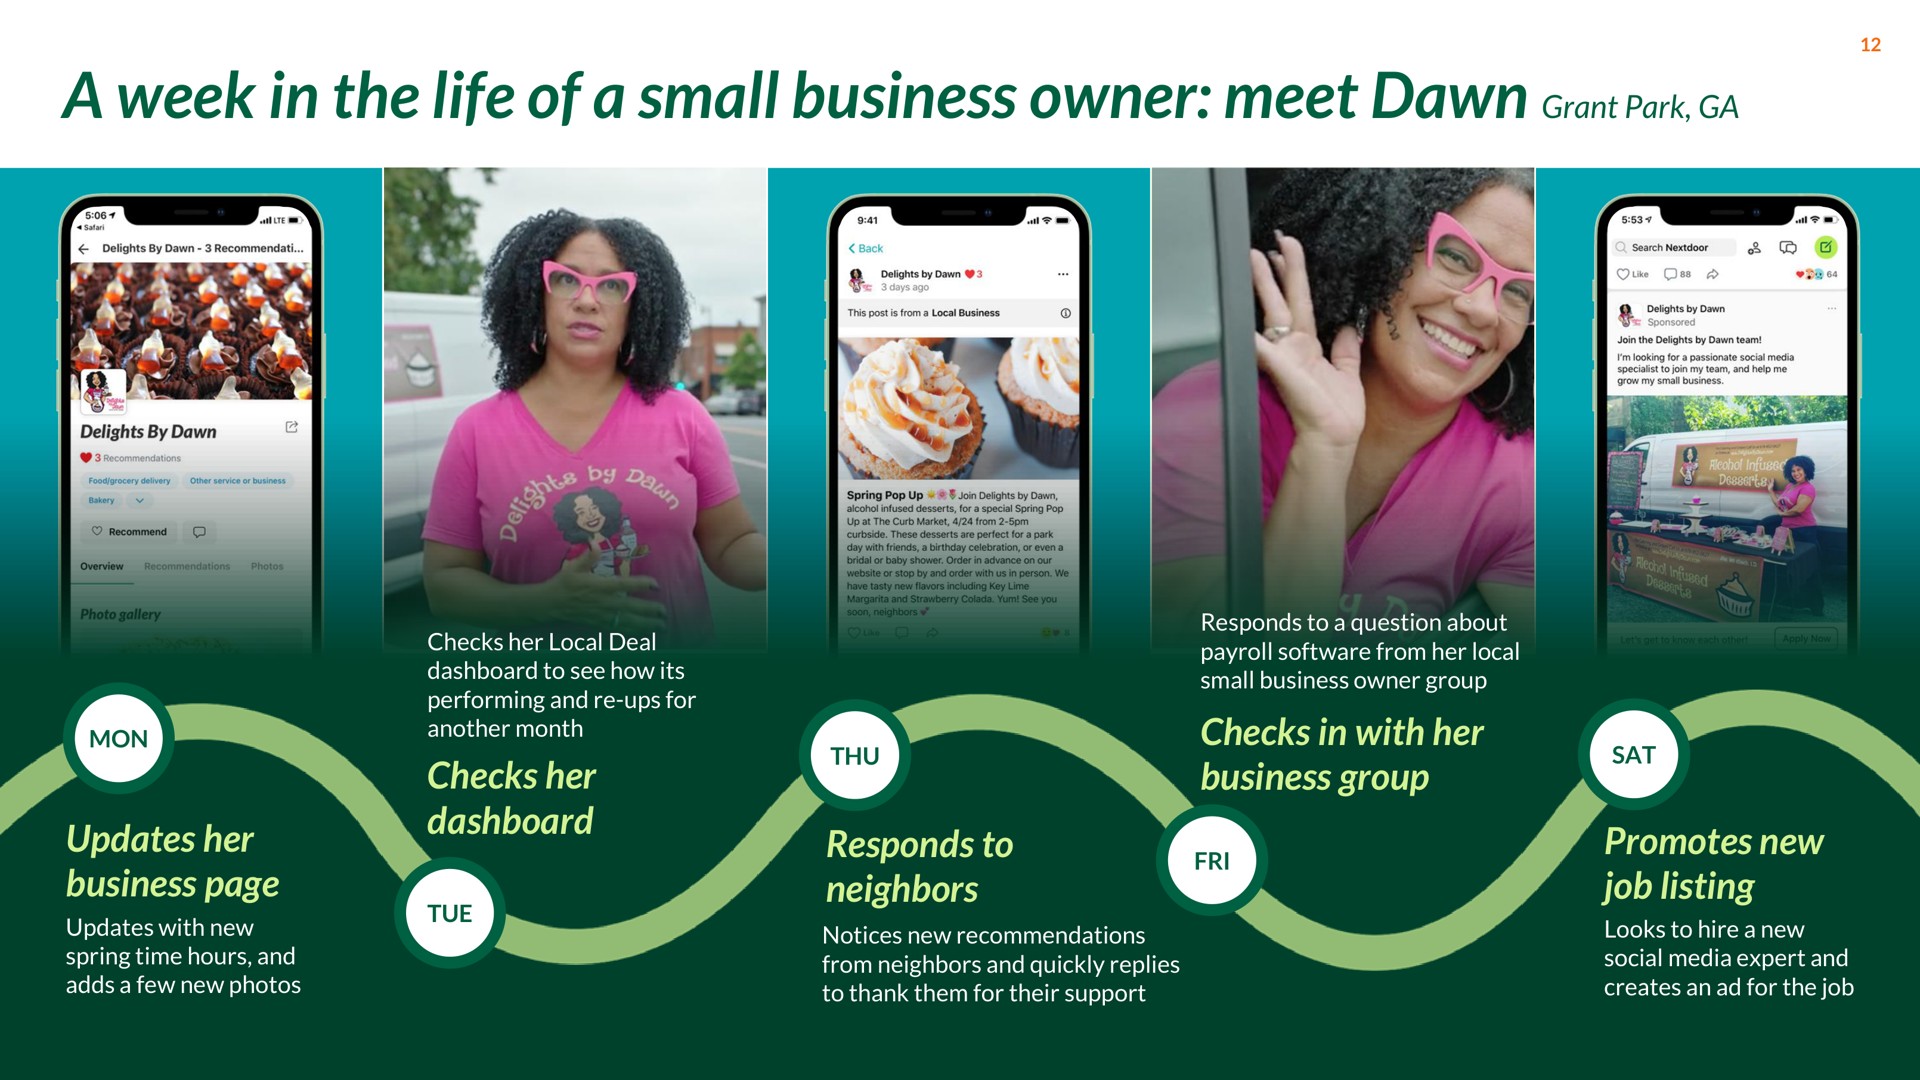 a week in the life of a small business owner meet dawn grant park | Nextdoor